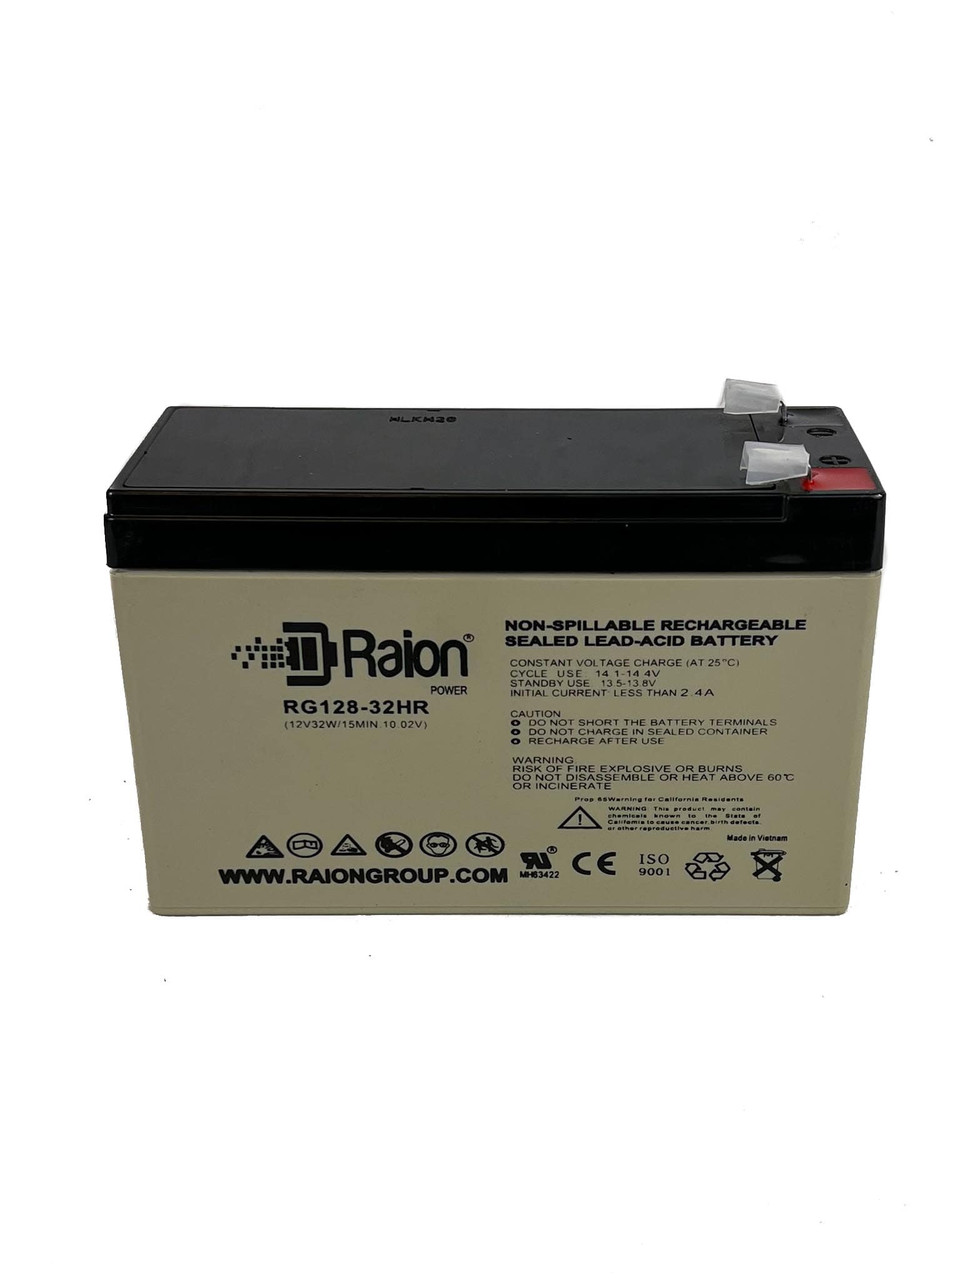 Raion Power RG128-32HR Replacement High Rate Battery Cartridge for FTTH Fiber PX12072F2-HG Broadband